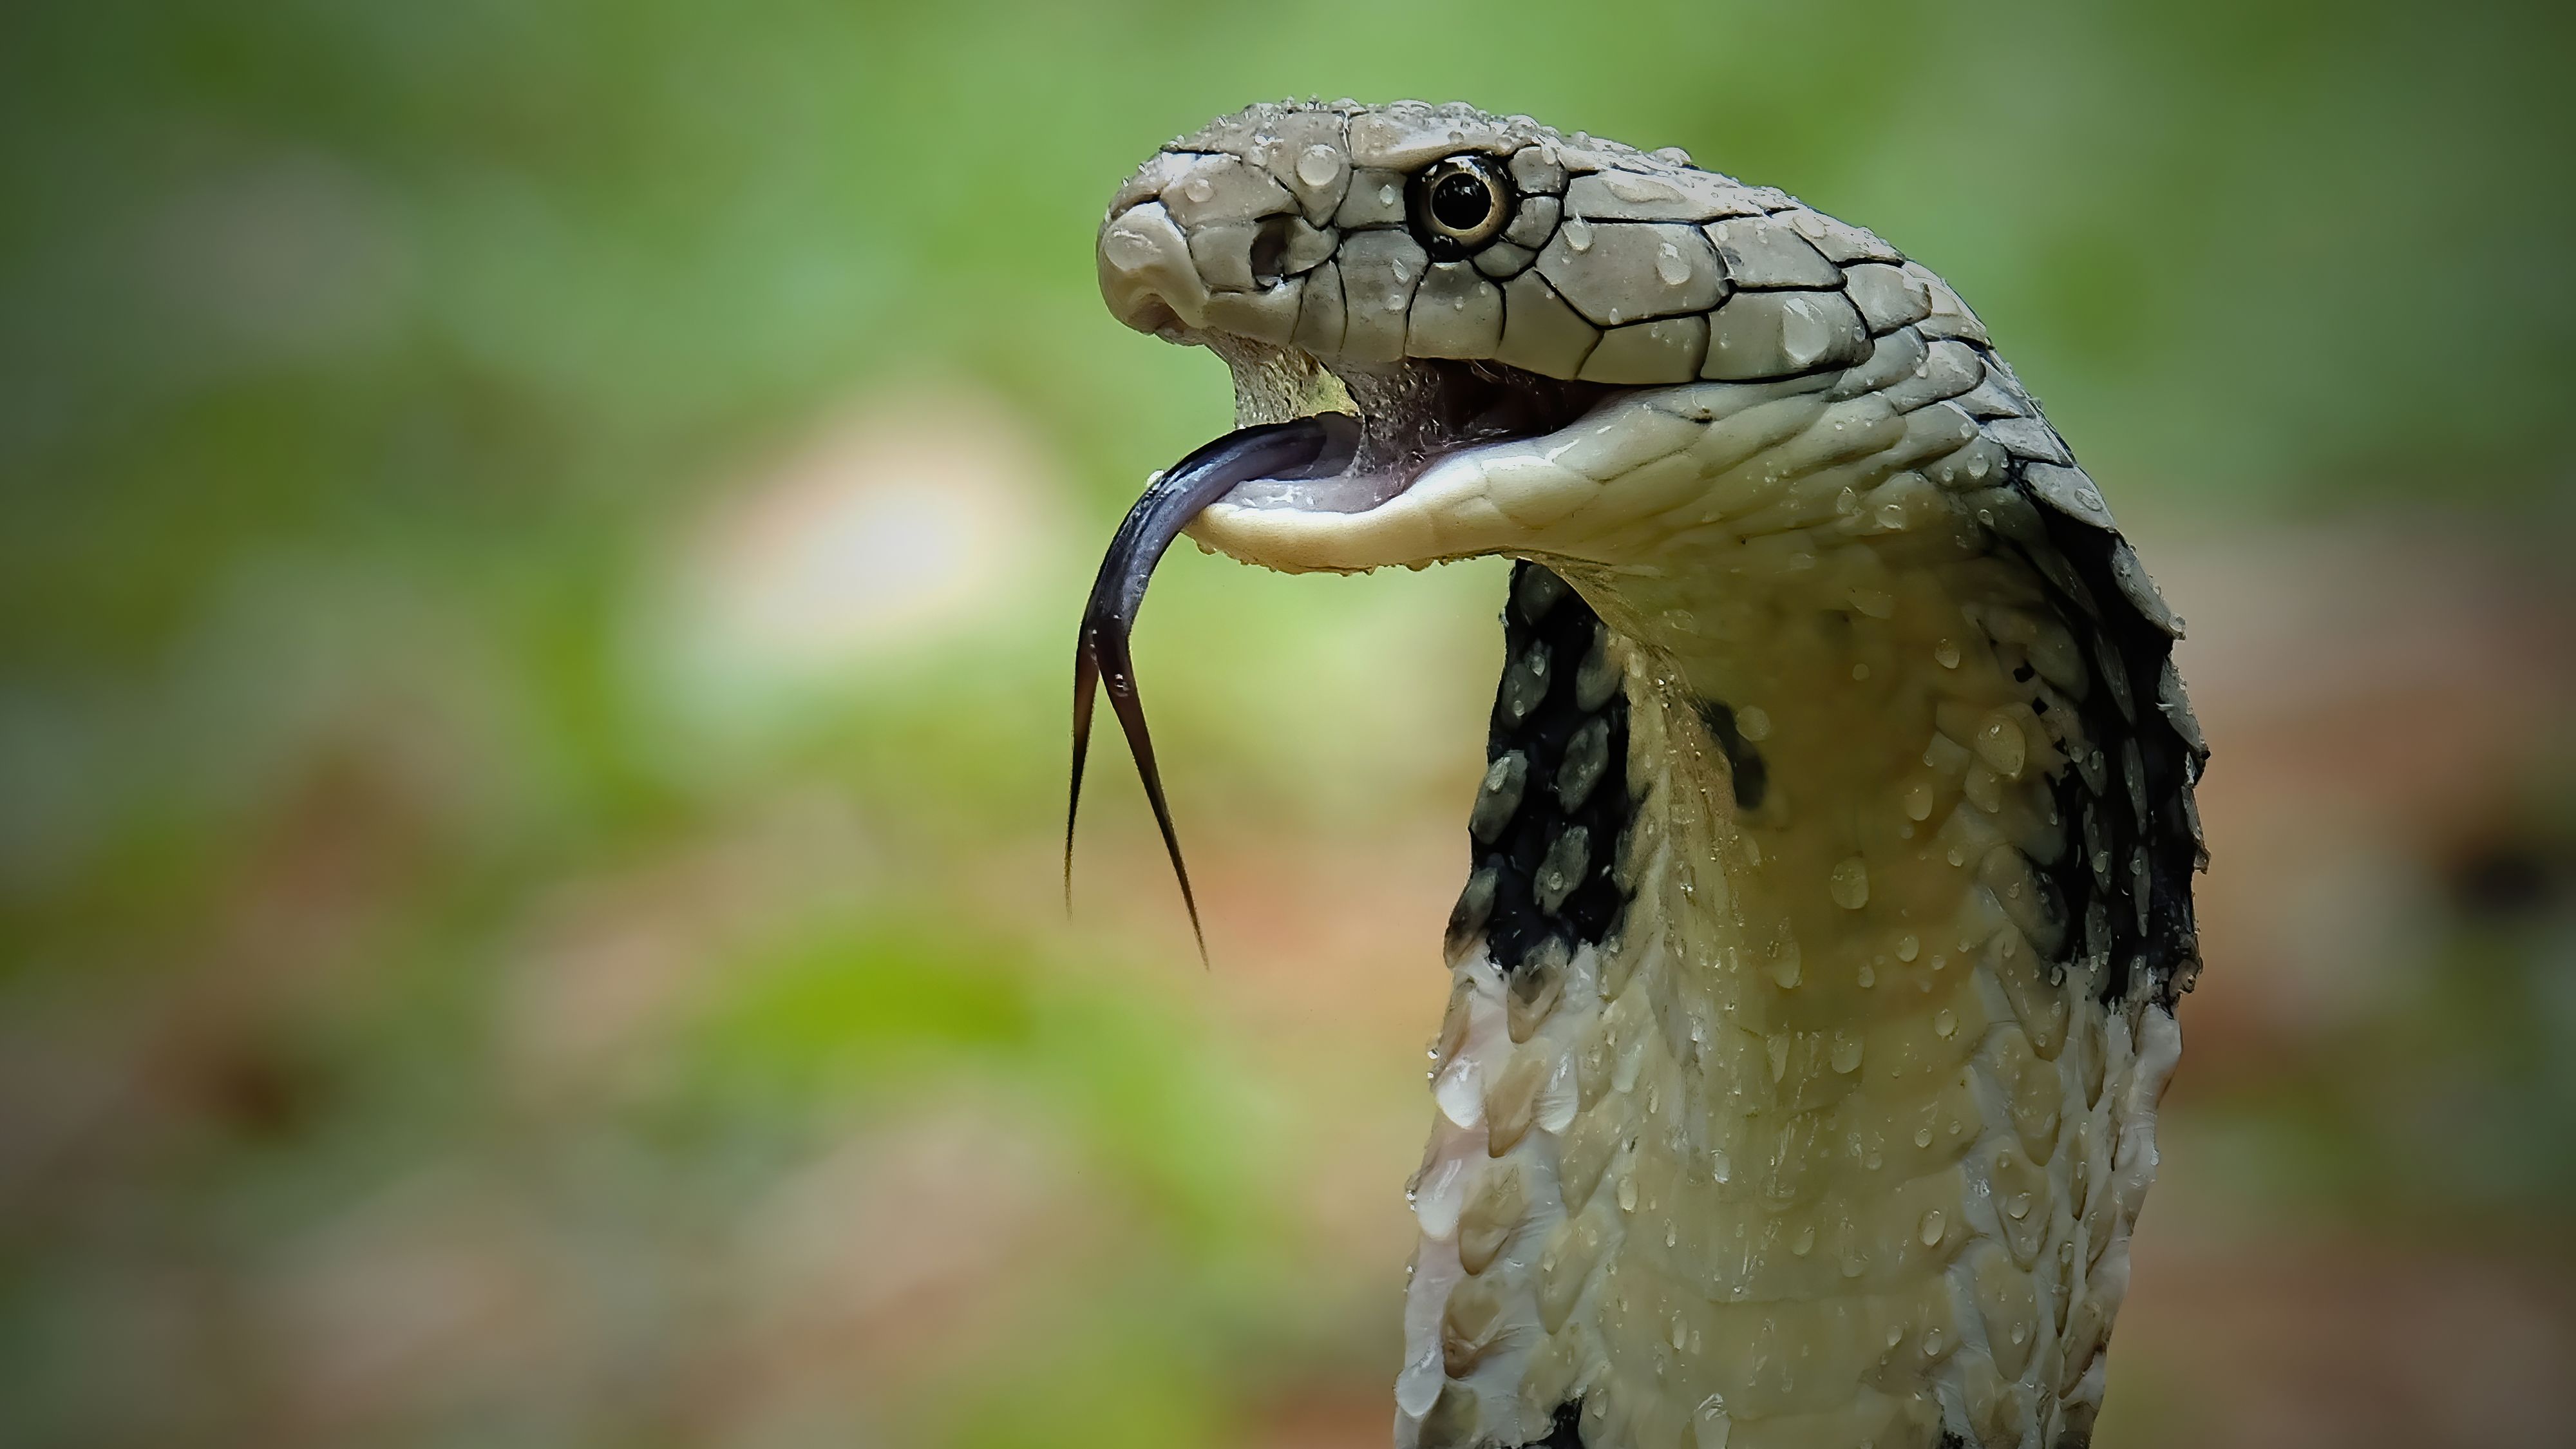 Can You Survive a King Cobra Bite?